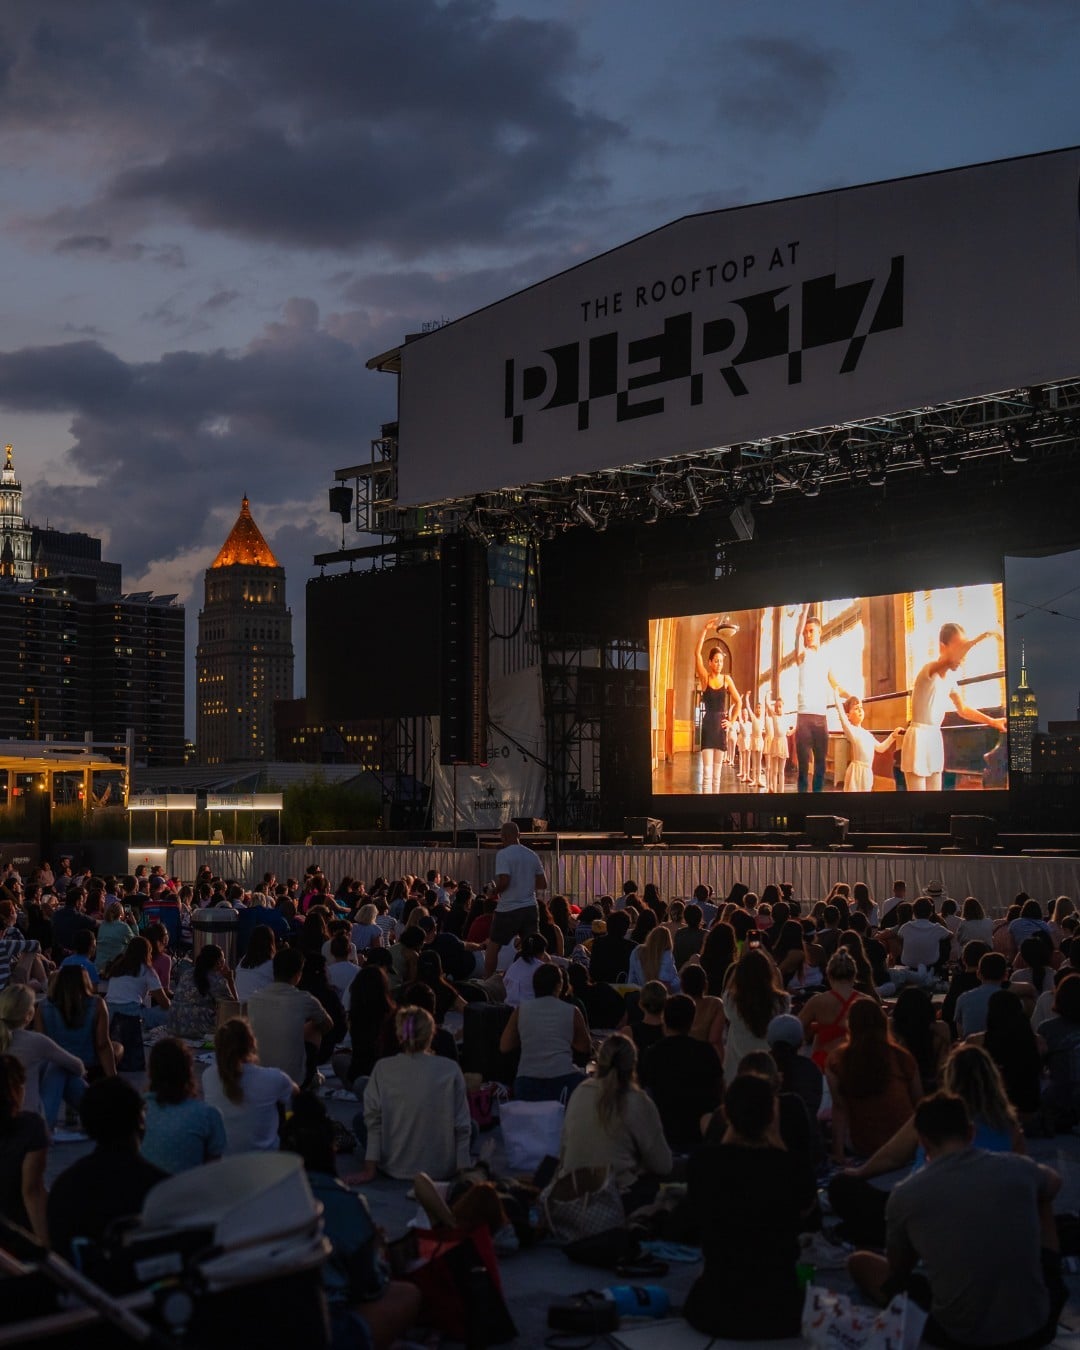 For Film Buffs. For Families. For Downtown. For All. Join us on The Rooftop for the final #SeaportCinema this season 🏙️  Pitch Perfect 🗓️ Thurs, 9/21 | 7:30pm  The Rooftop at Pier 17 Space is limited, so arrive early to save your spot. Doors open at 6:30pm. Guests are permitted to bring their own blankets & chairs. Details ➤ link in bio #TheSeaport